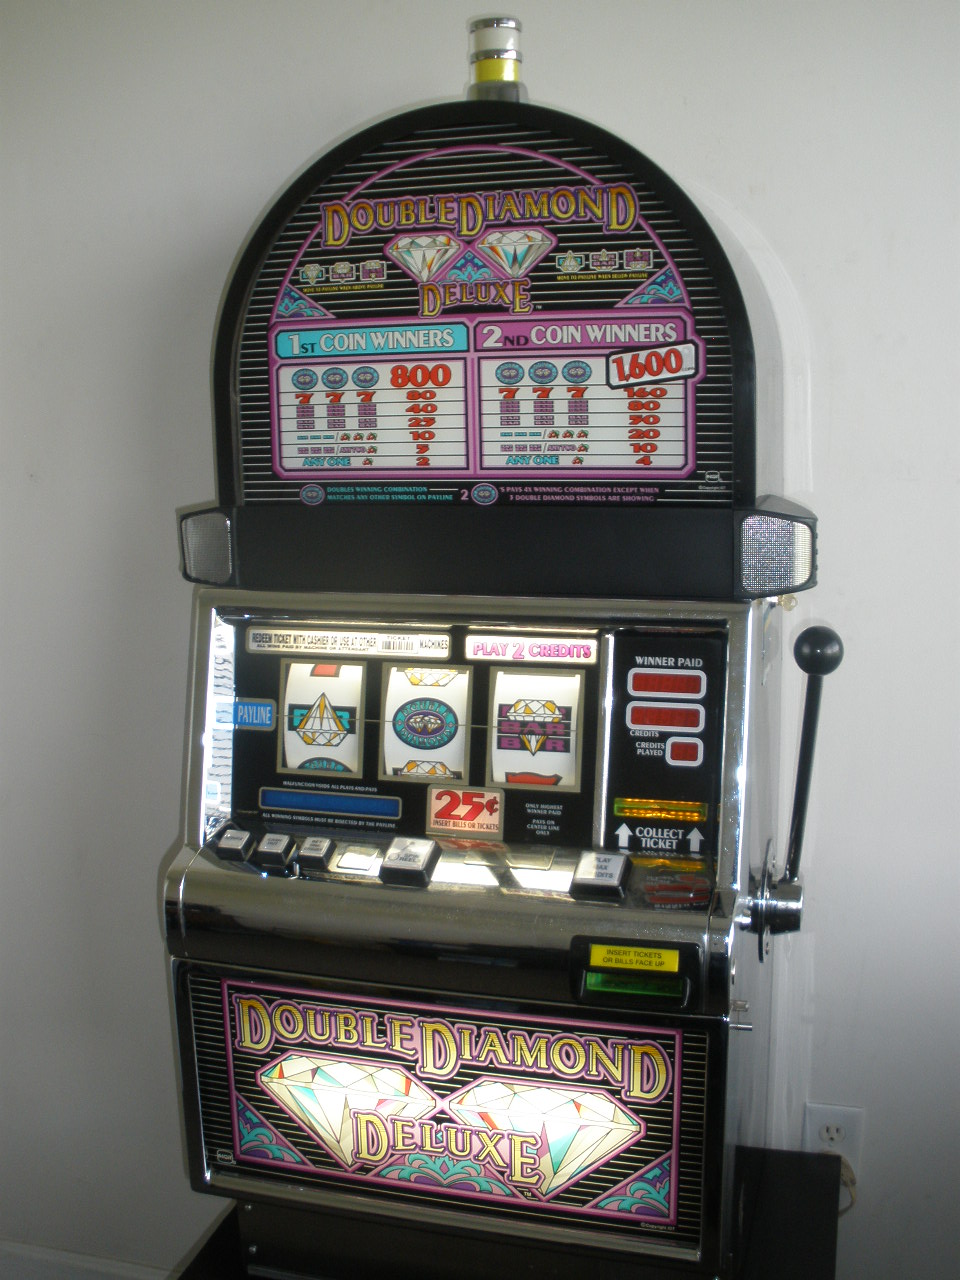 IGT DOUBLE DIAMOND DELUXE S2000 SLOT MACHINE - ROUND TOP For Sale ...